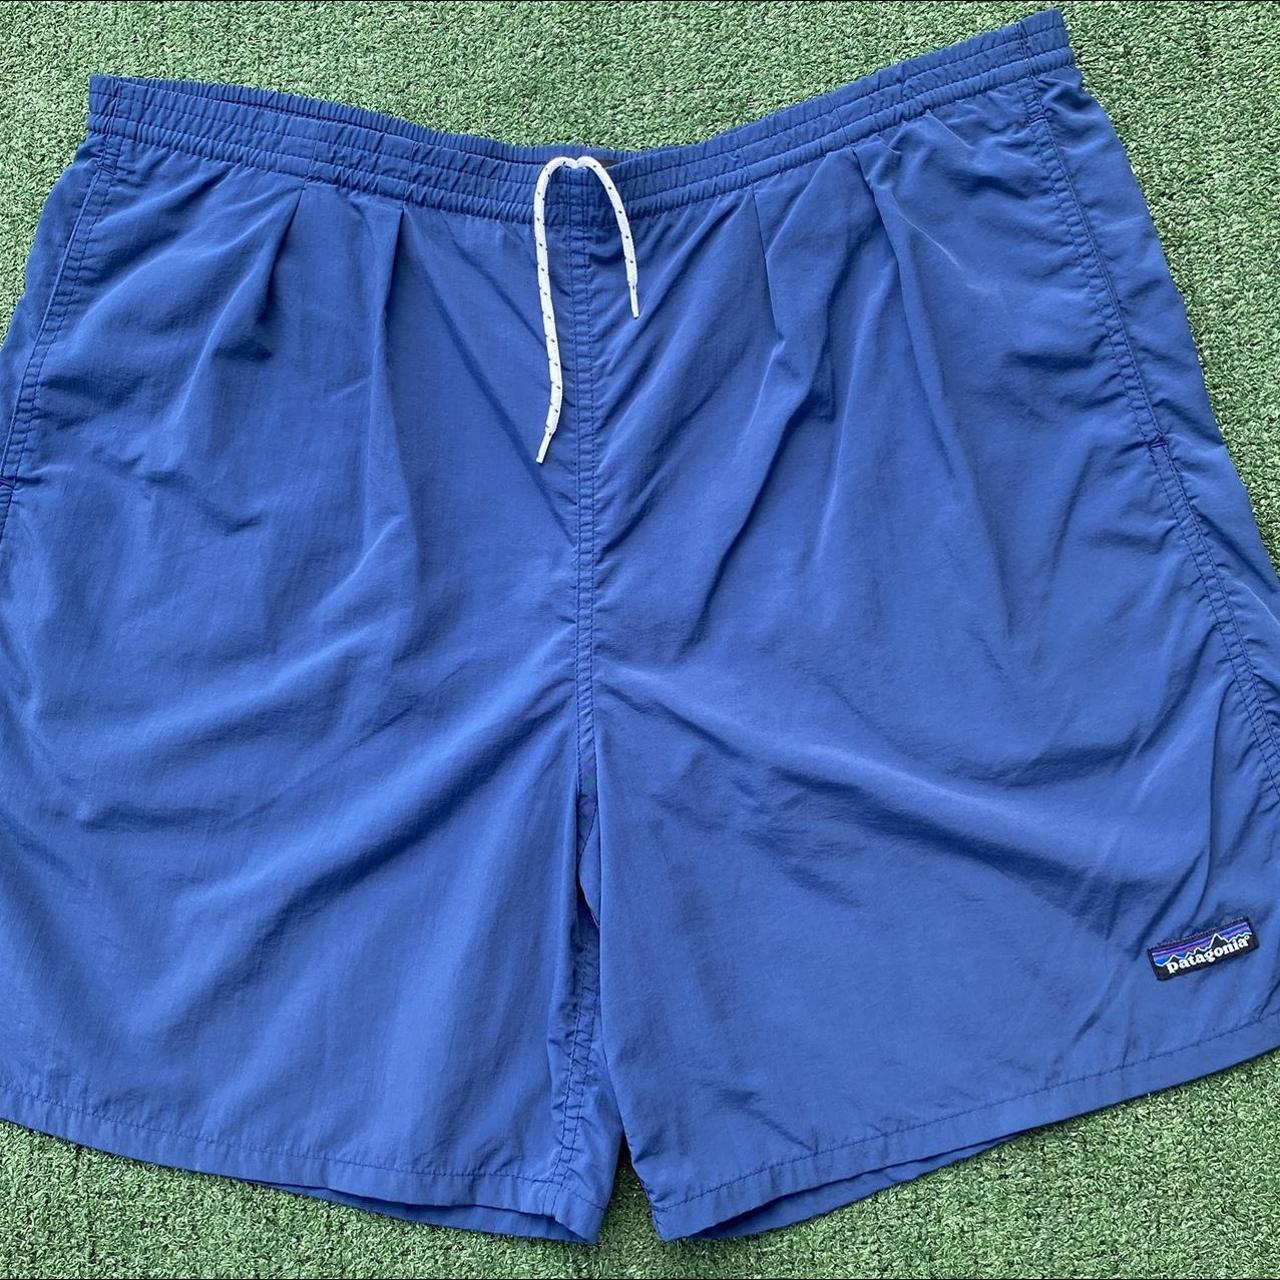 Patagonia Blue Lined Baggies 5 Inseam Size Large